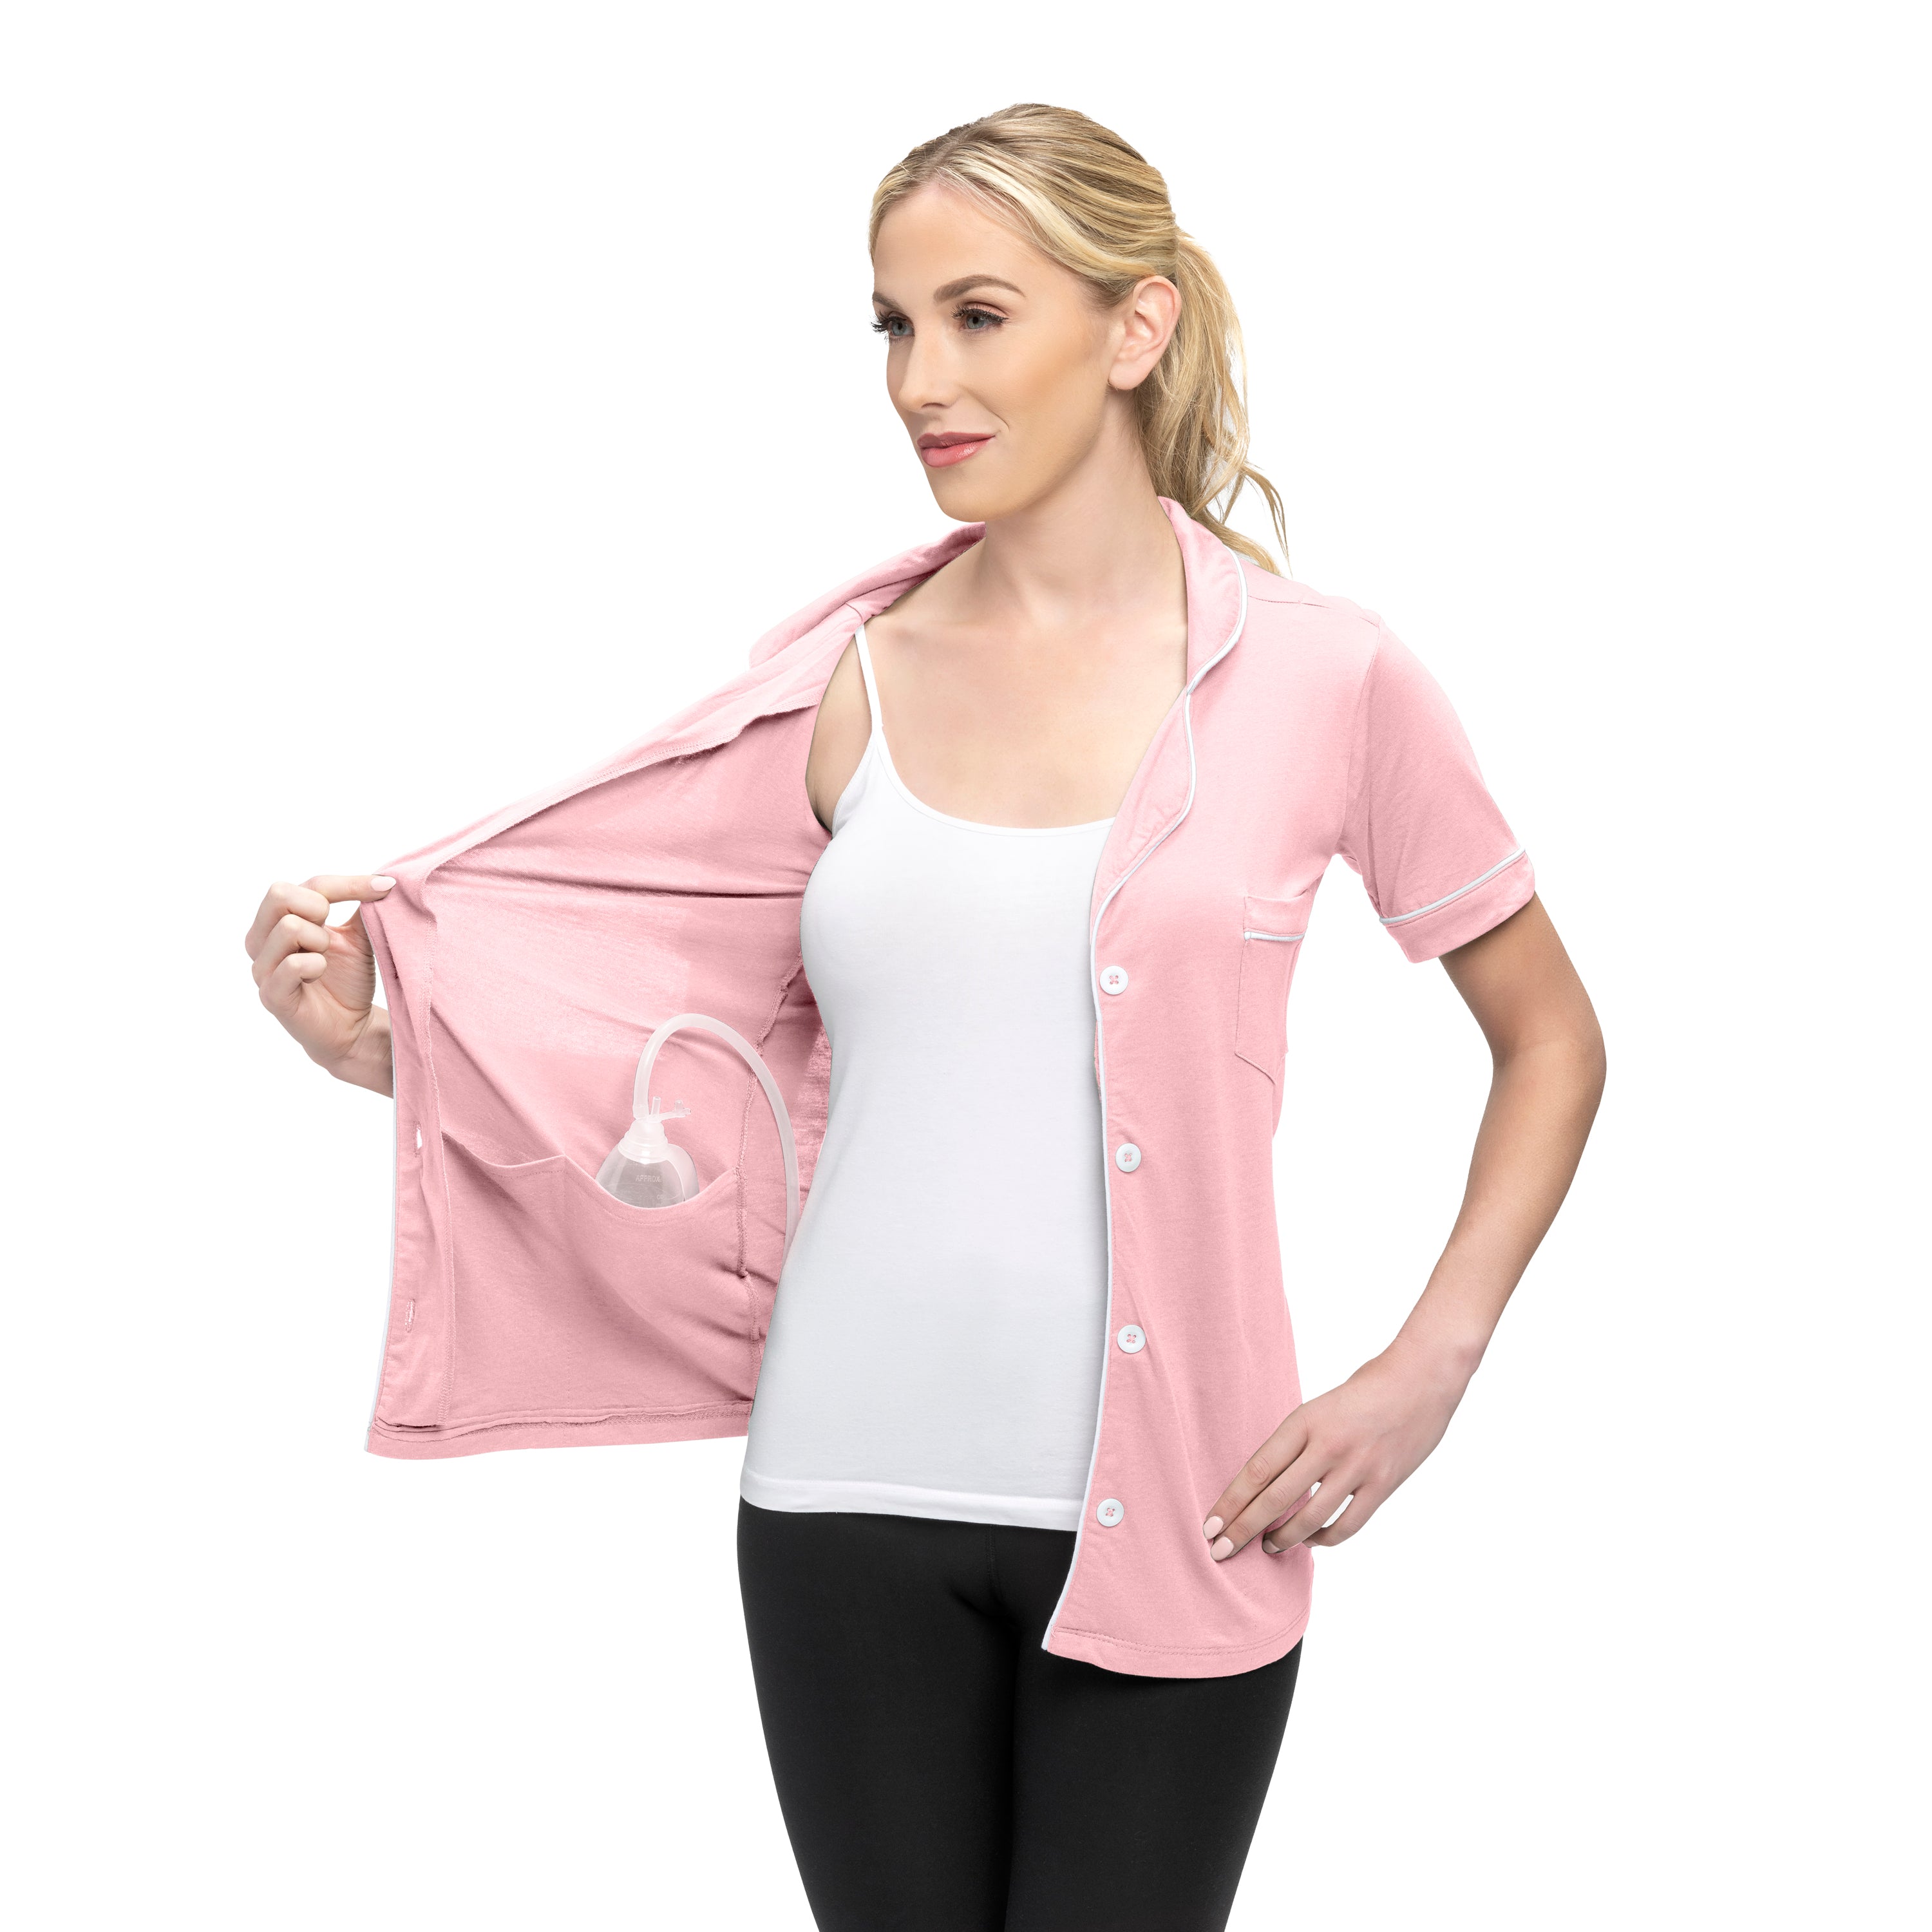 Mastectomy Recovery Hoodie with Surgical Drain Pockets Lightweight